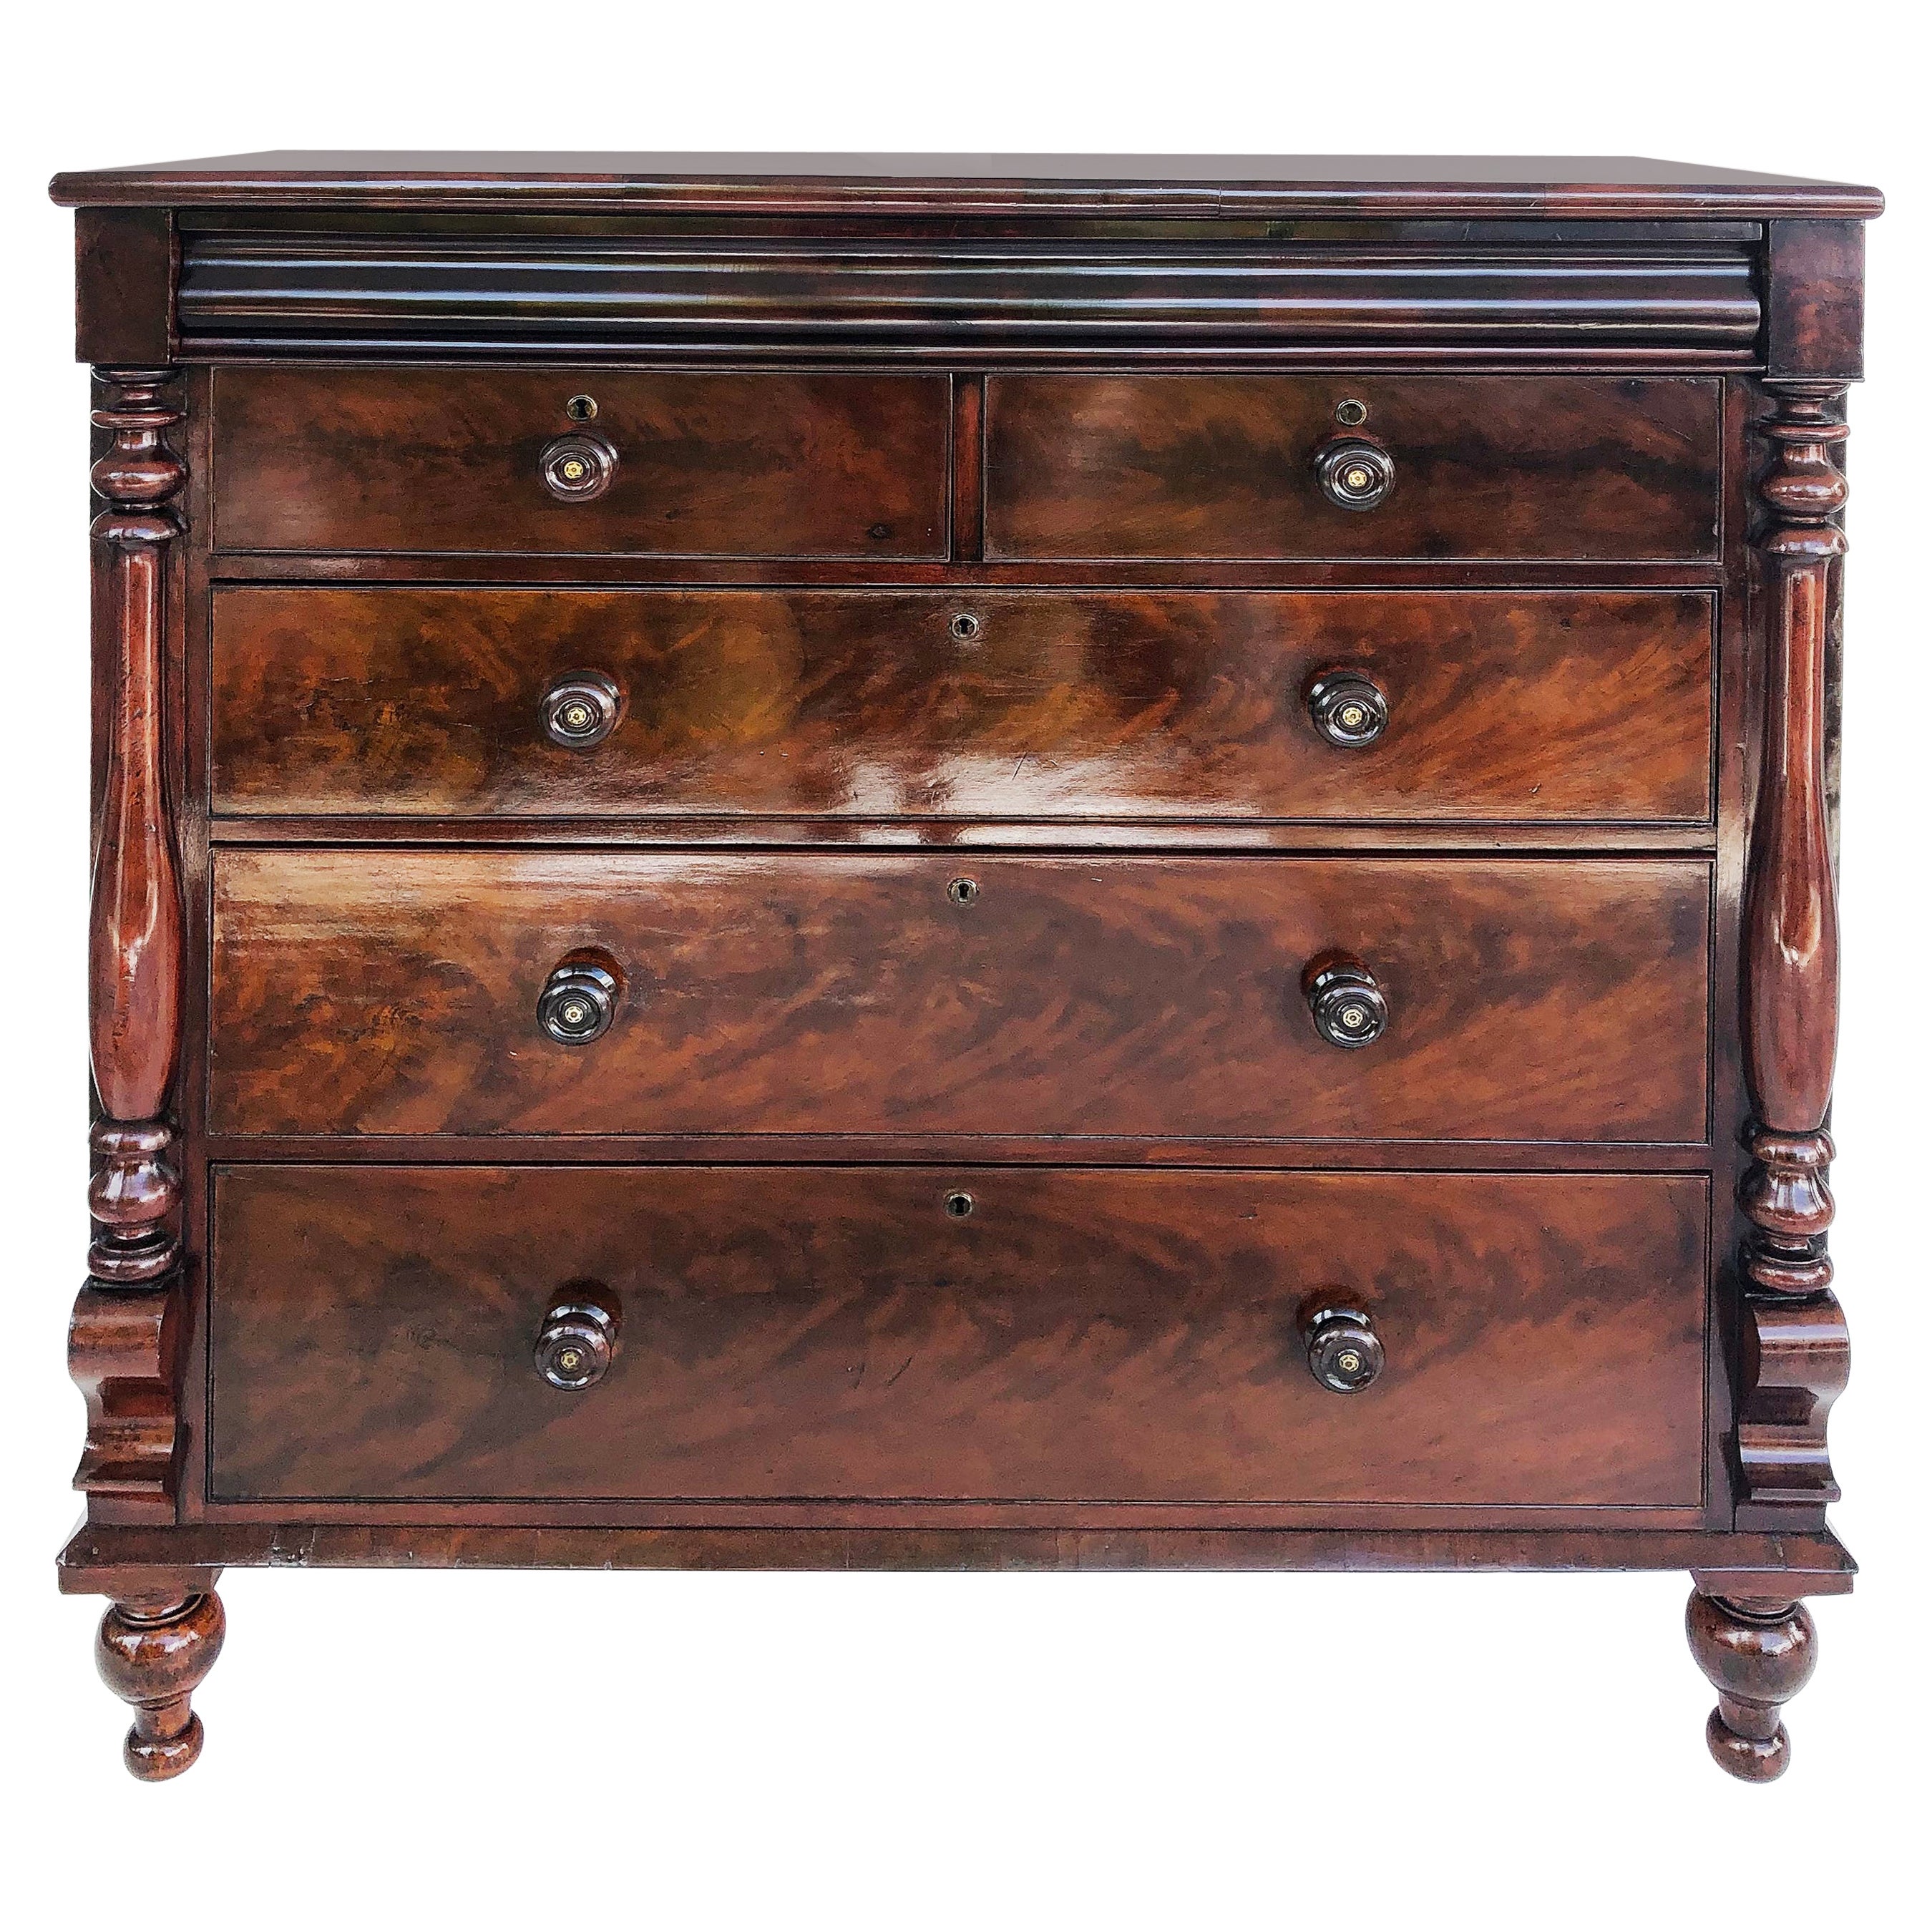 1830s American Empire Flame Mahogany Chest of Drawers with Mother of Pearl Pulls